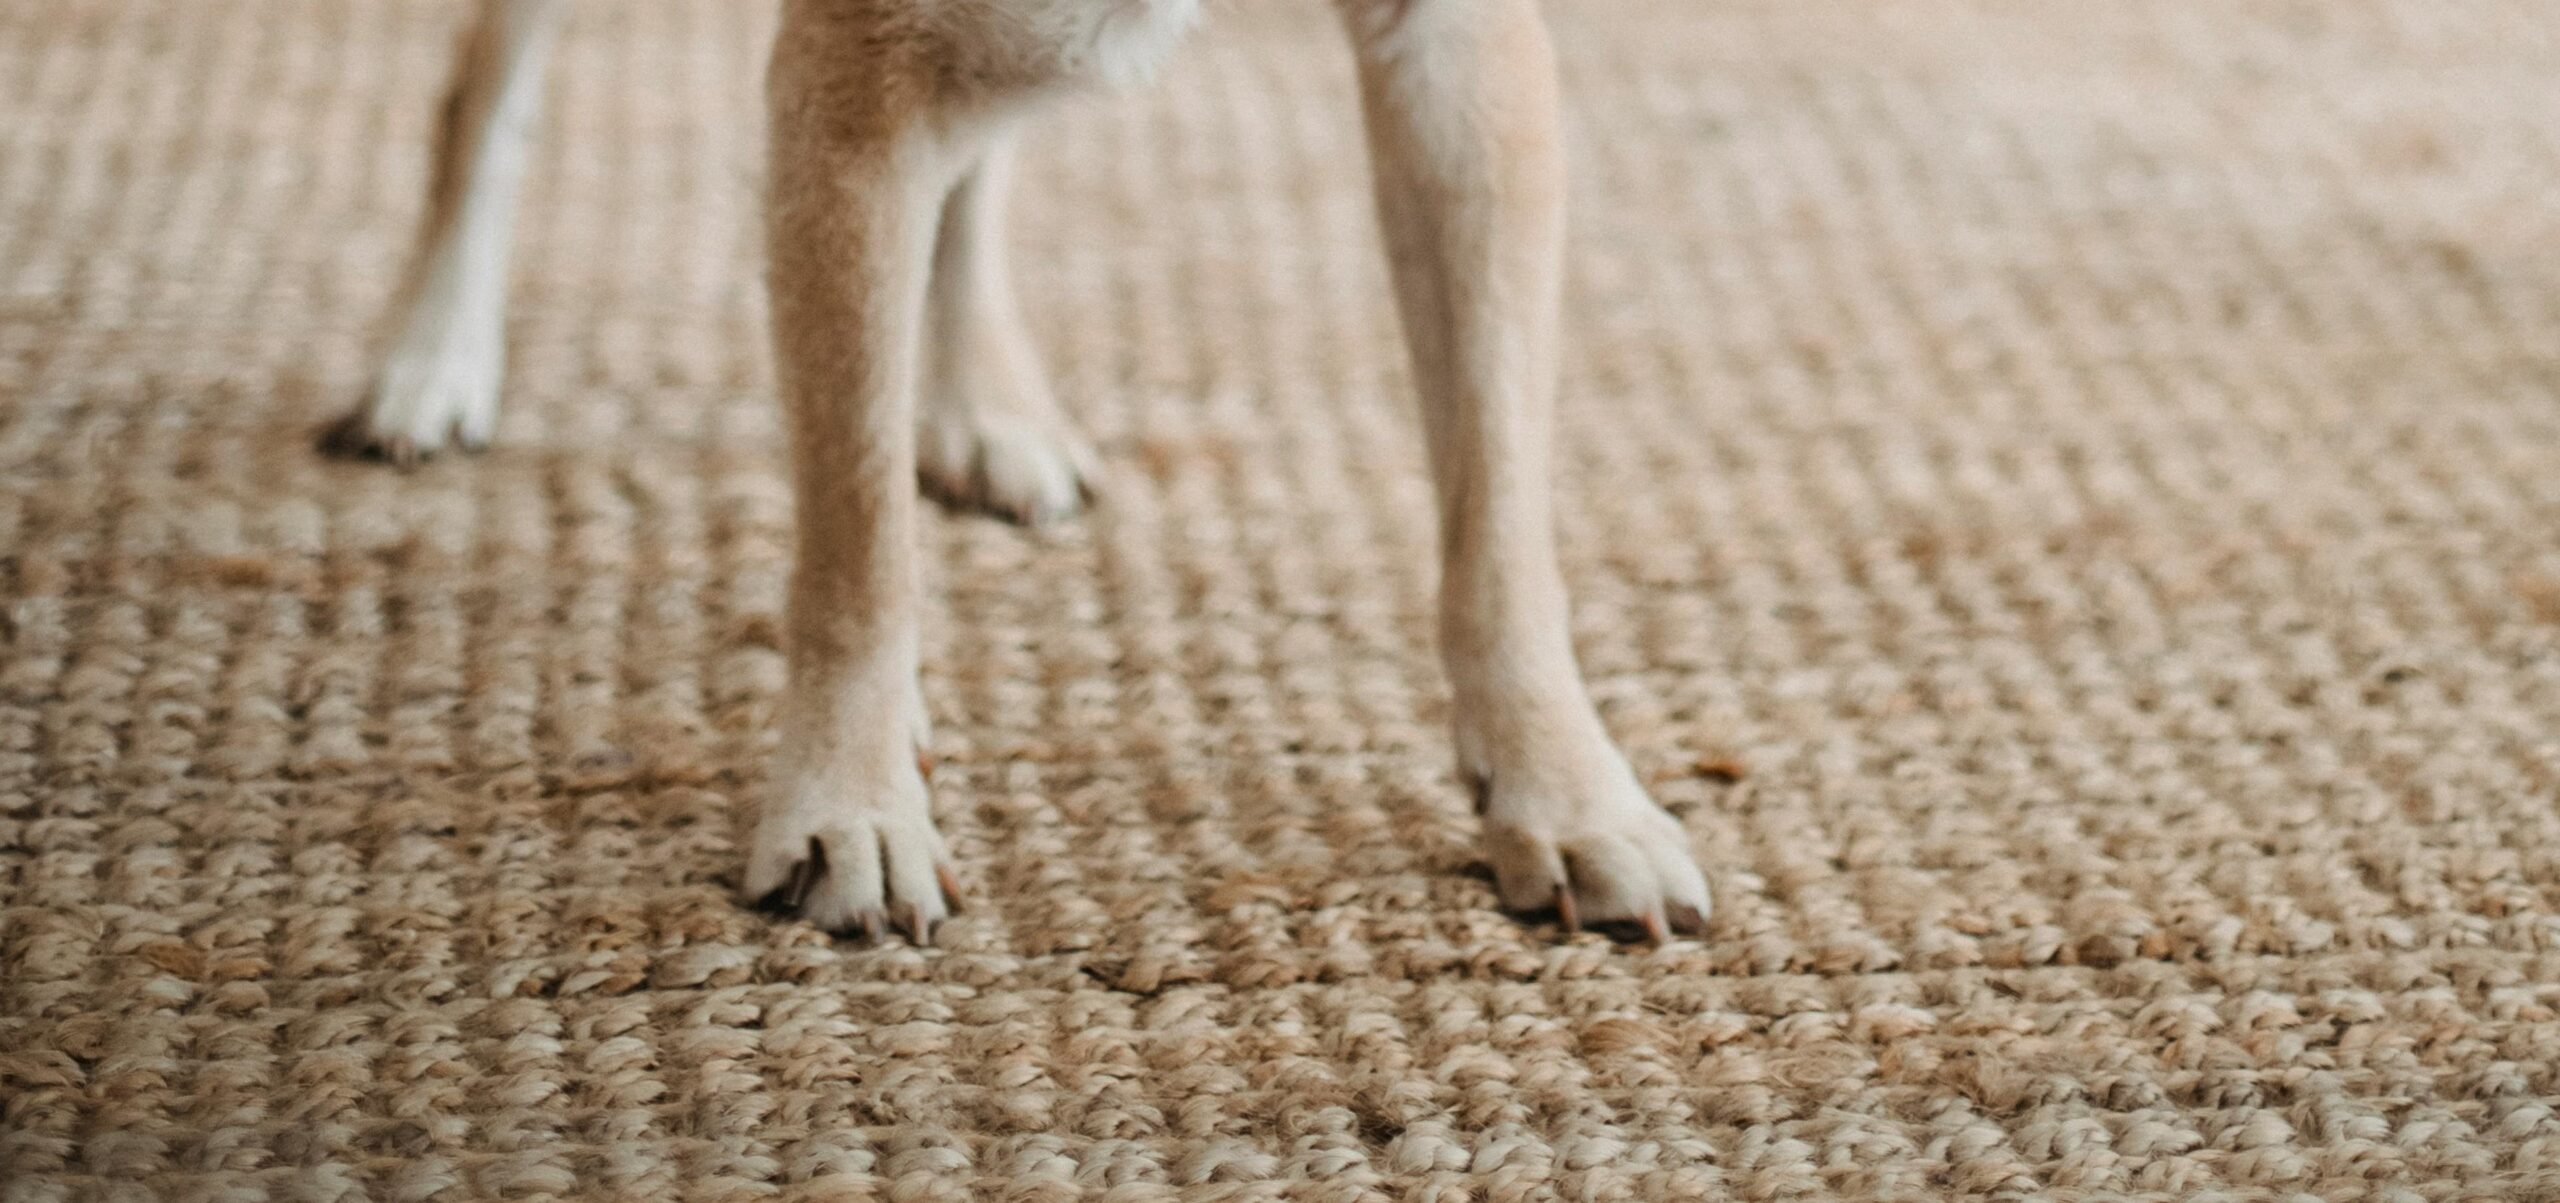 Dogs owners may want to reconsider the purchase of jute rugs. Jute holds on to liquids like dog urine which causes permanent staining and lingering odor.